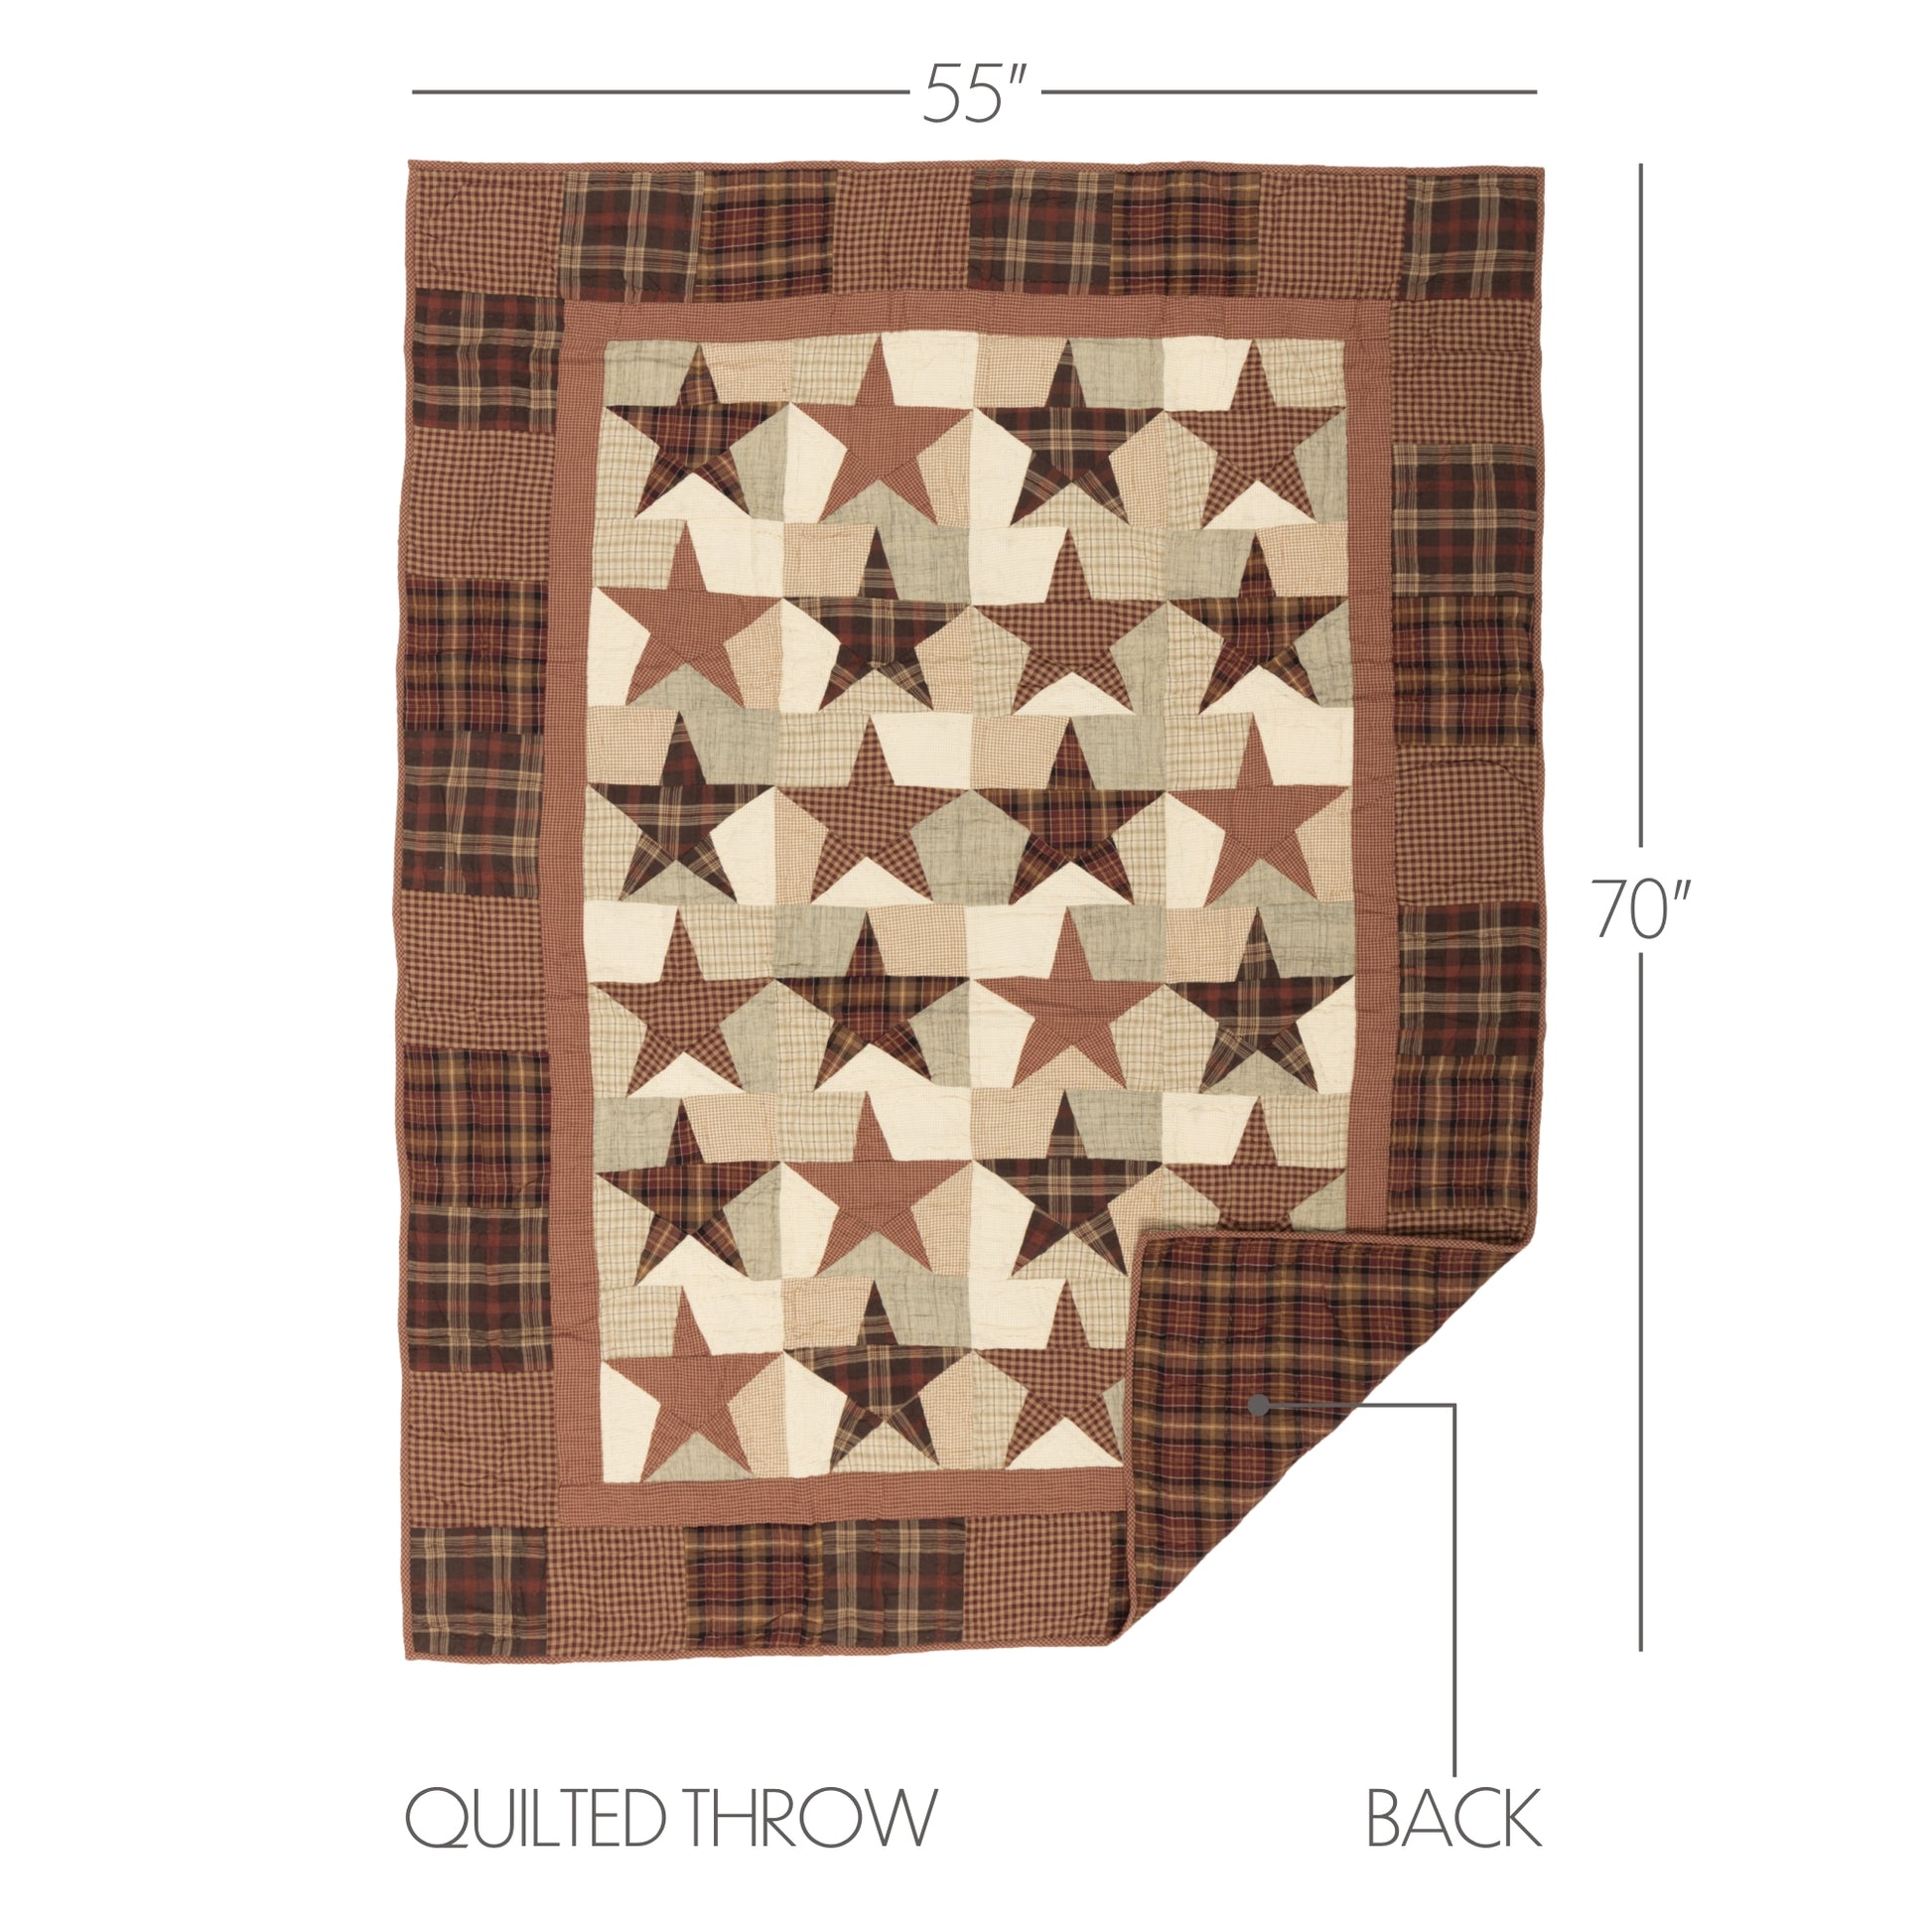 19977-Abilene-Star-Quilted-Throw-70x55-image-1